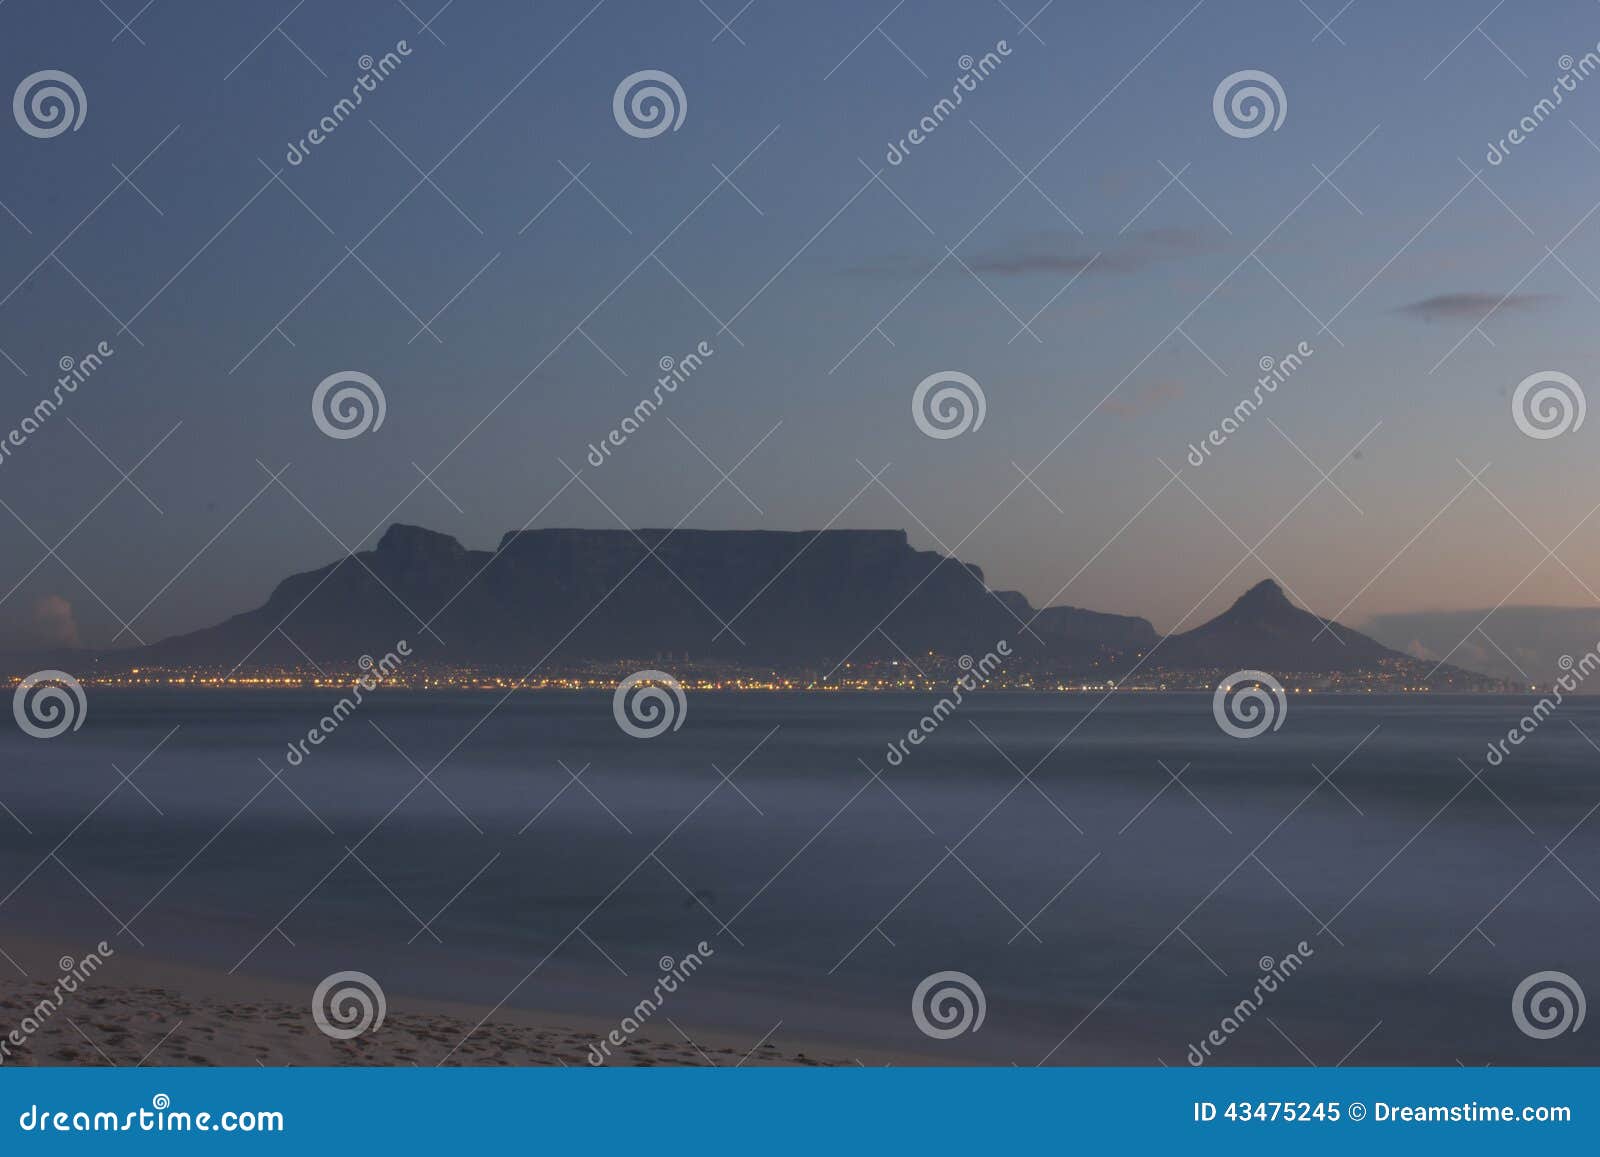 cape town - bloubergstrand south africa with a view of table mountain